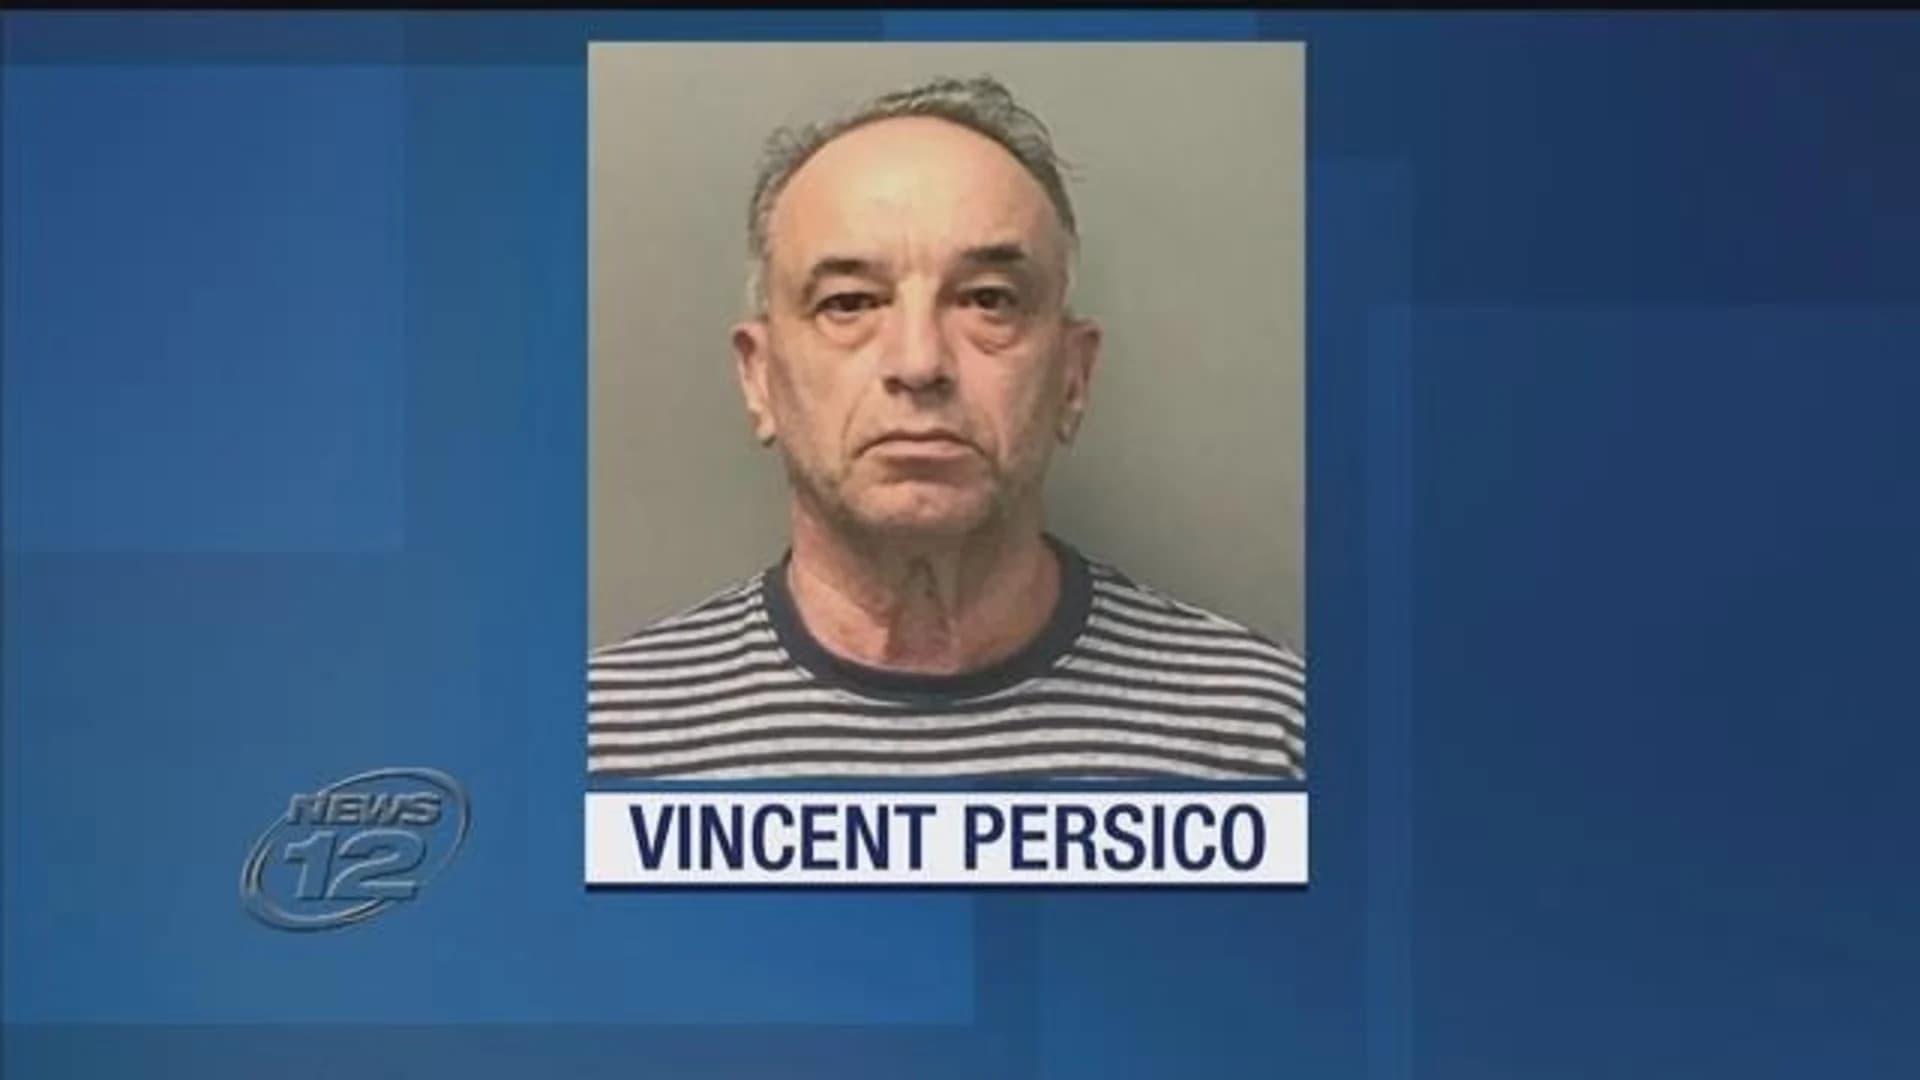 Convicted sex offender faces charges for alleged sex act with dog